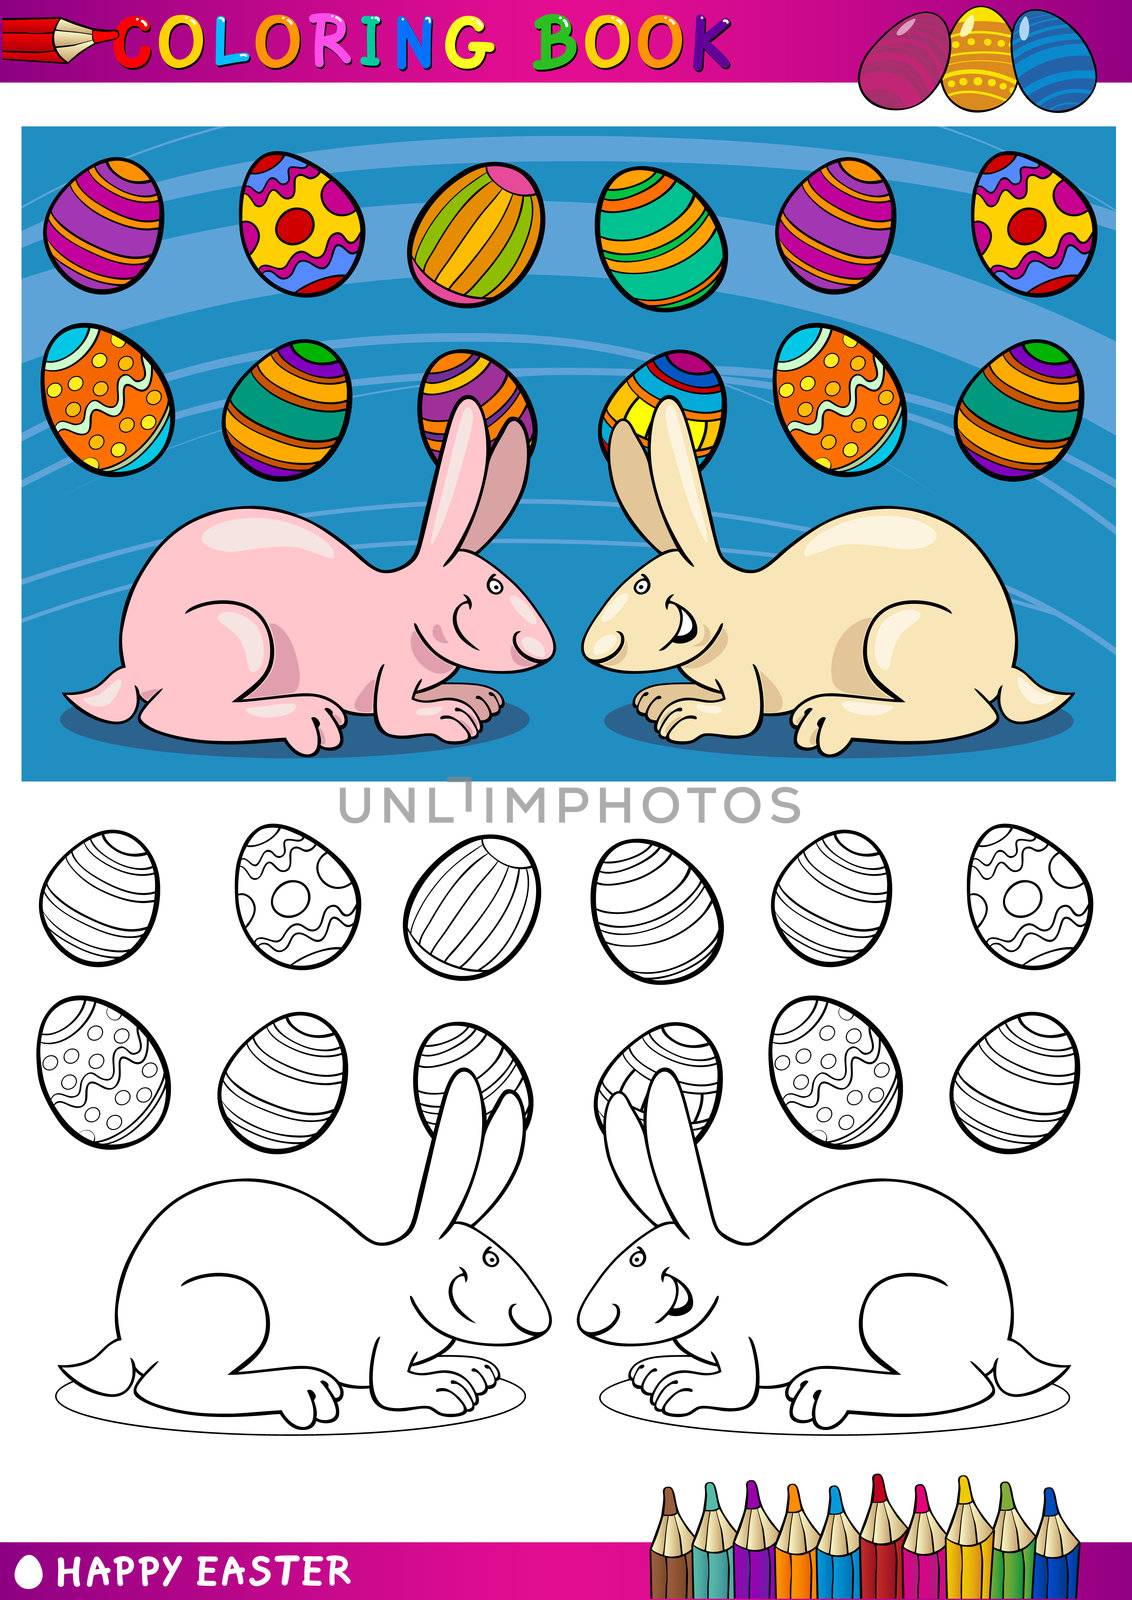 Coloring Book or Page Cartoon Illustration of Two Easter Bunnies with Painted Eggs and Spring Flower